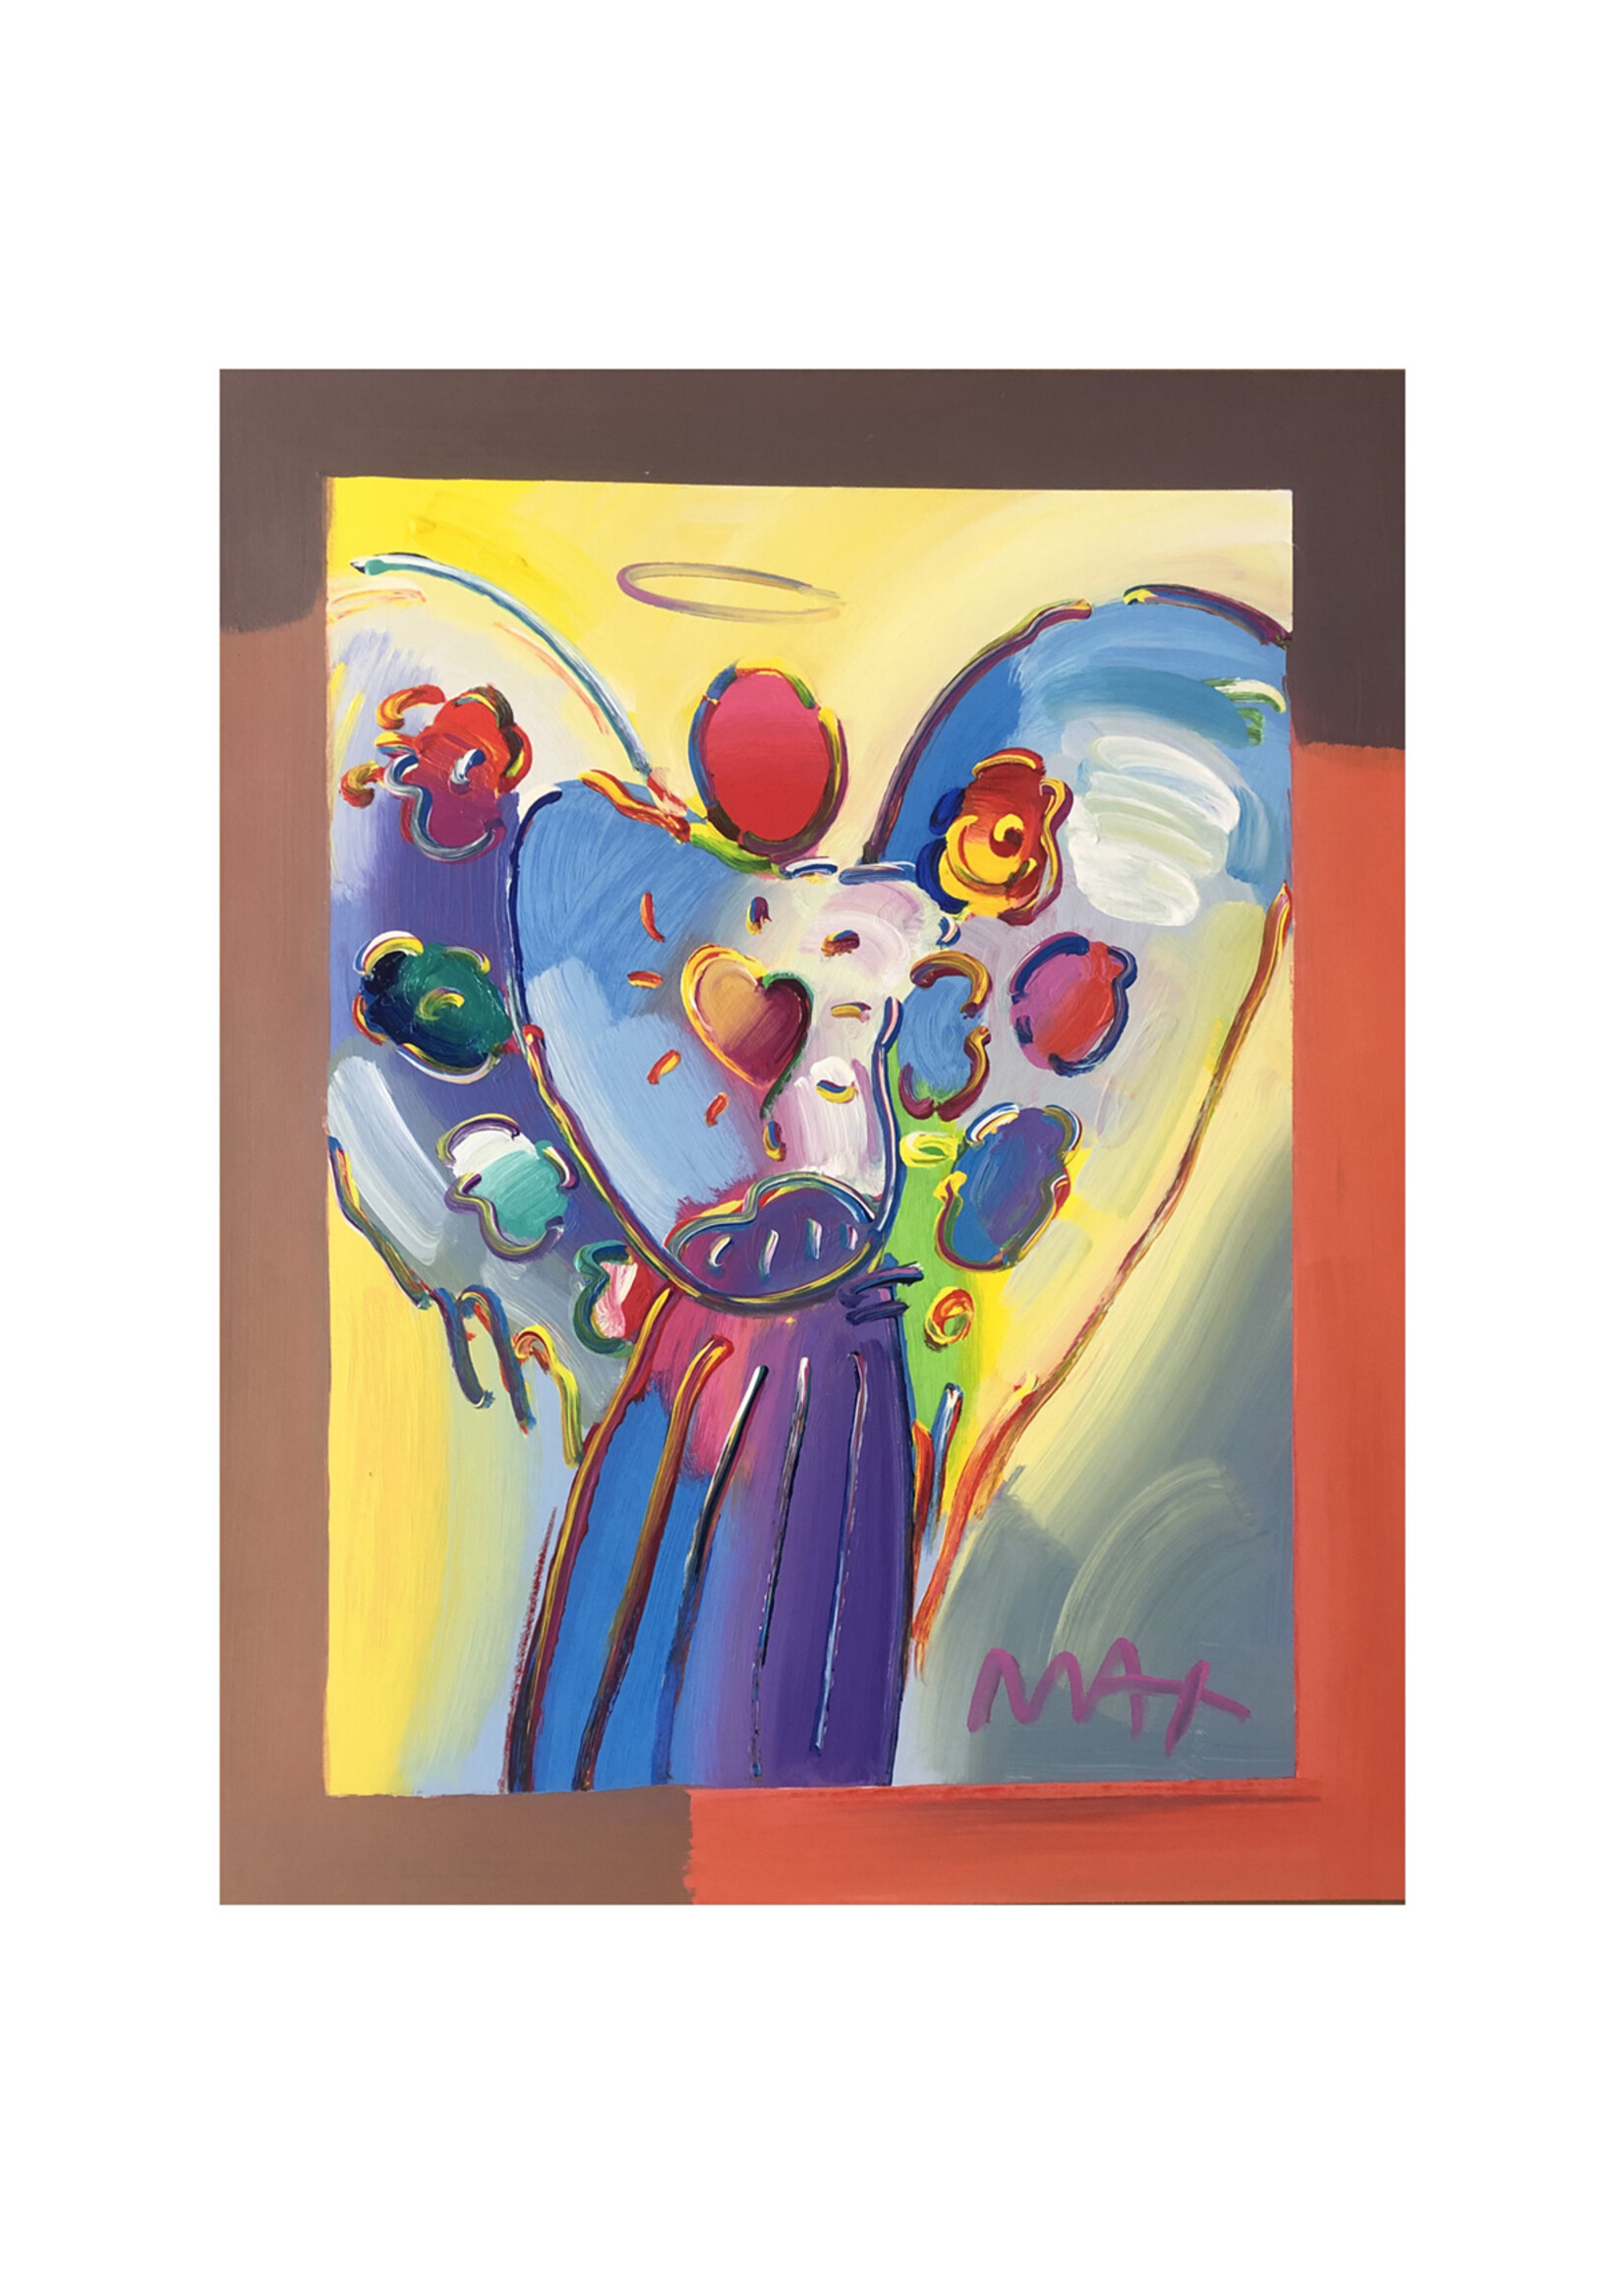 Peter Max Peter Max "Angel with Heart"